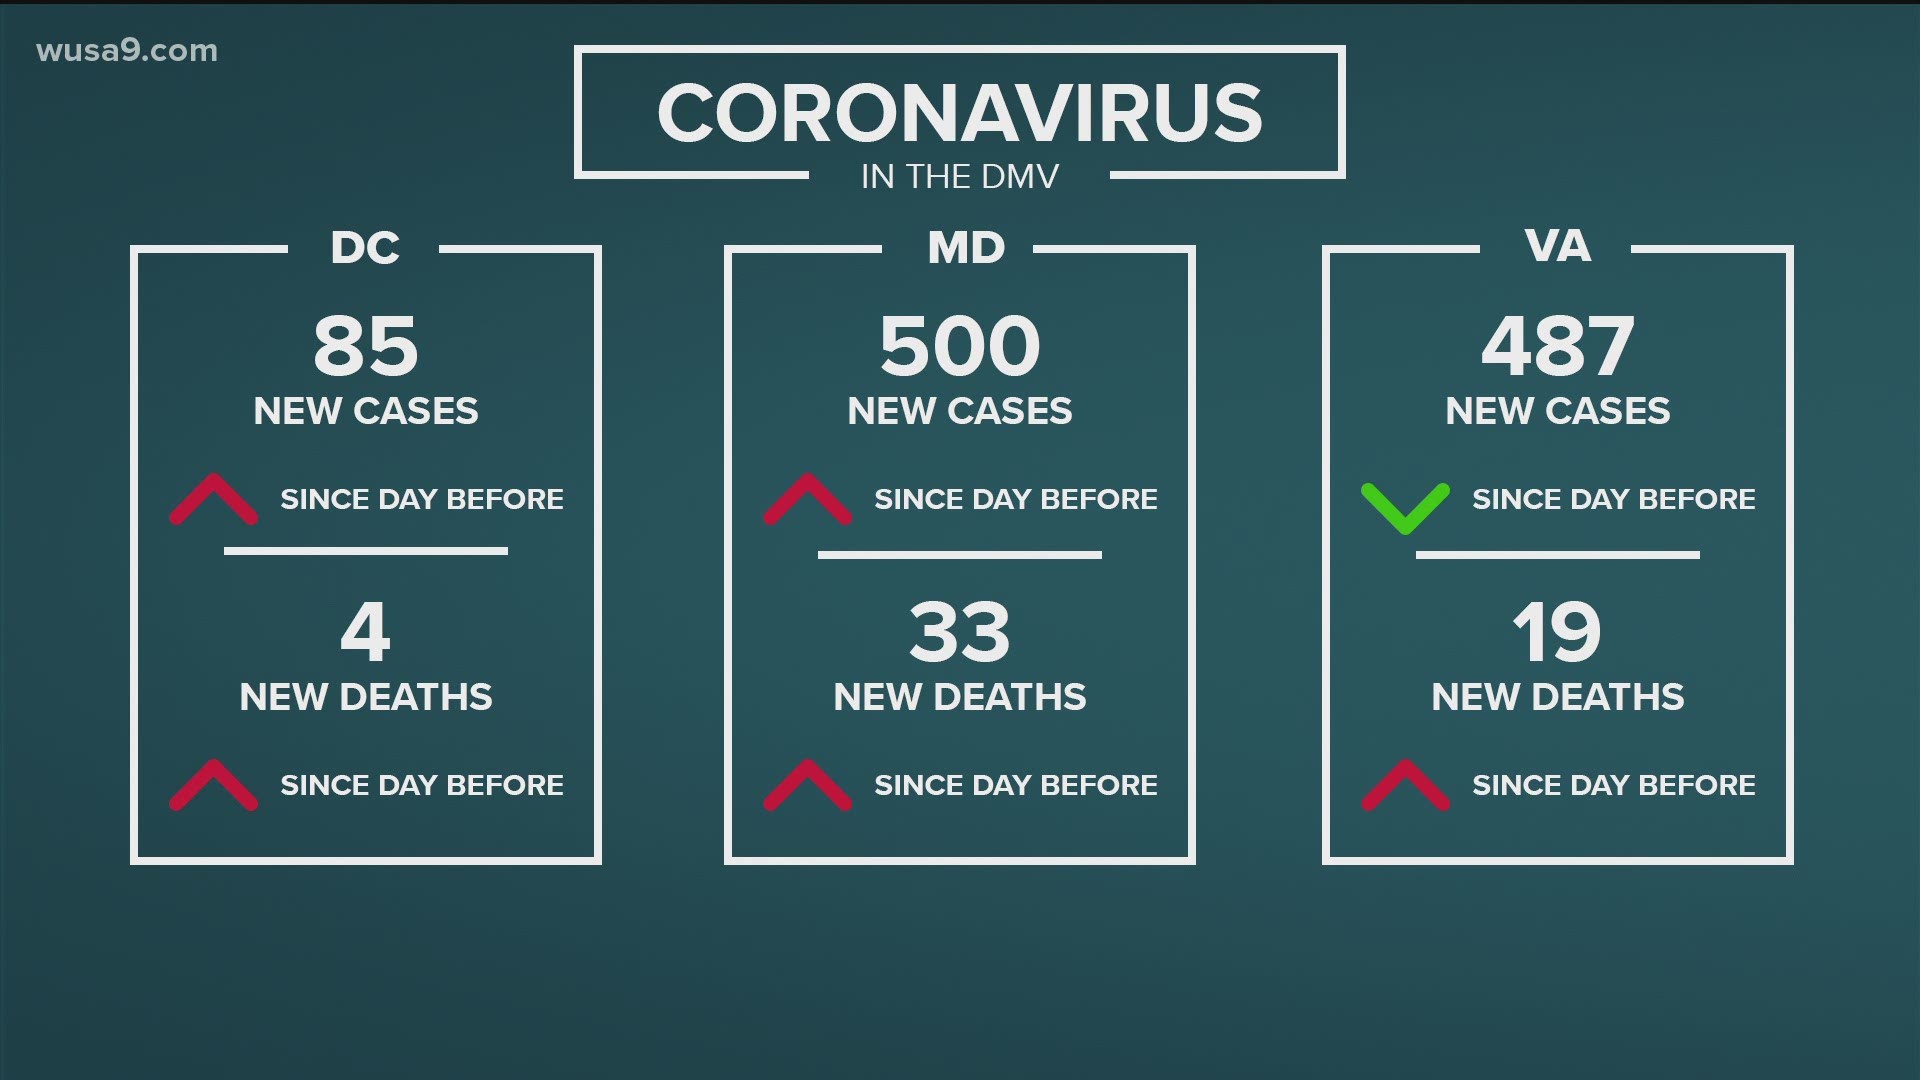 The coronavirus impact on the DMV continues to grow. Here are the latest updates.